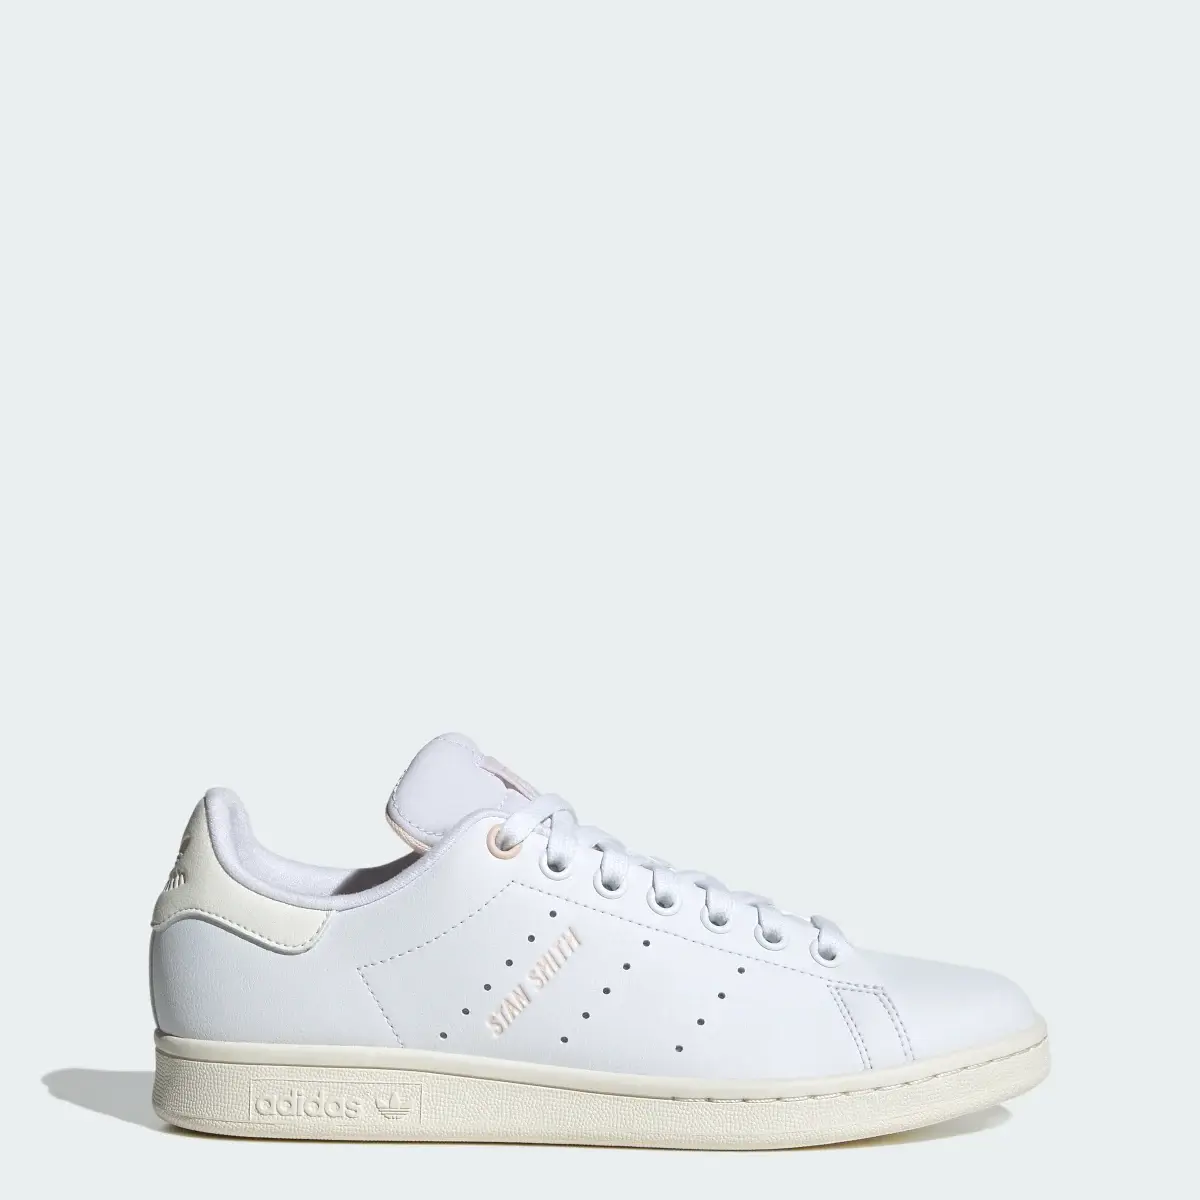 Adidas Stan Smith Shoes. 1